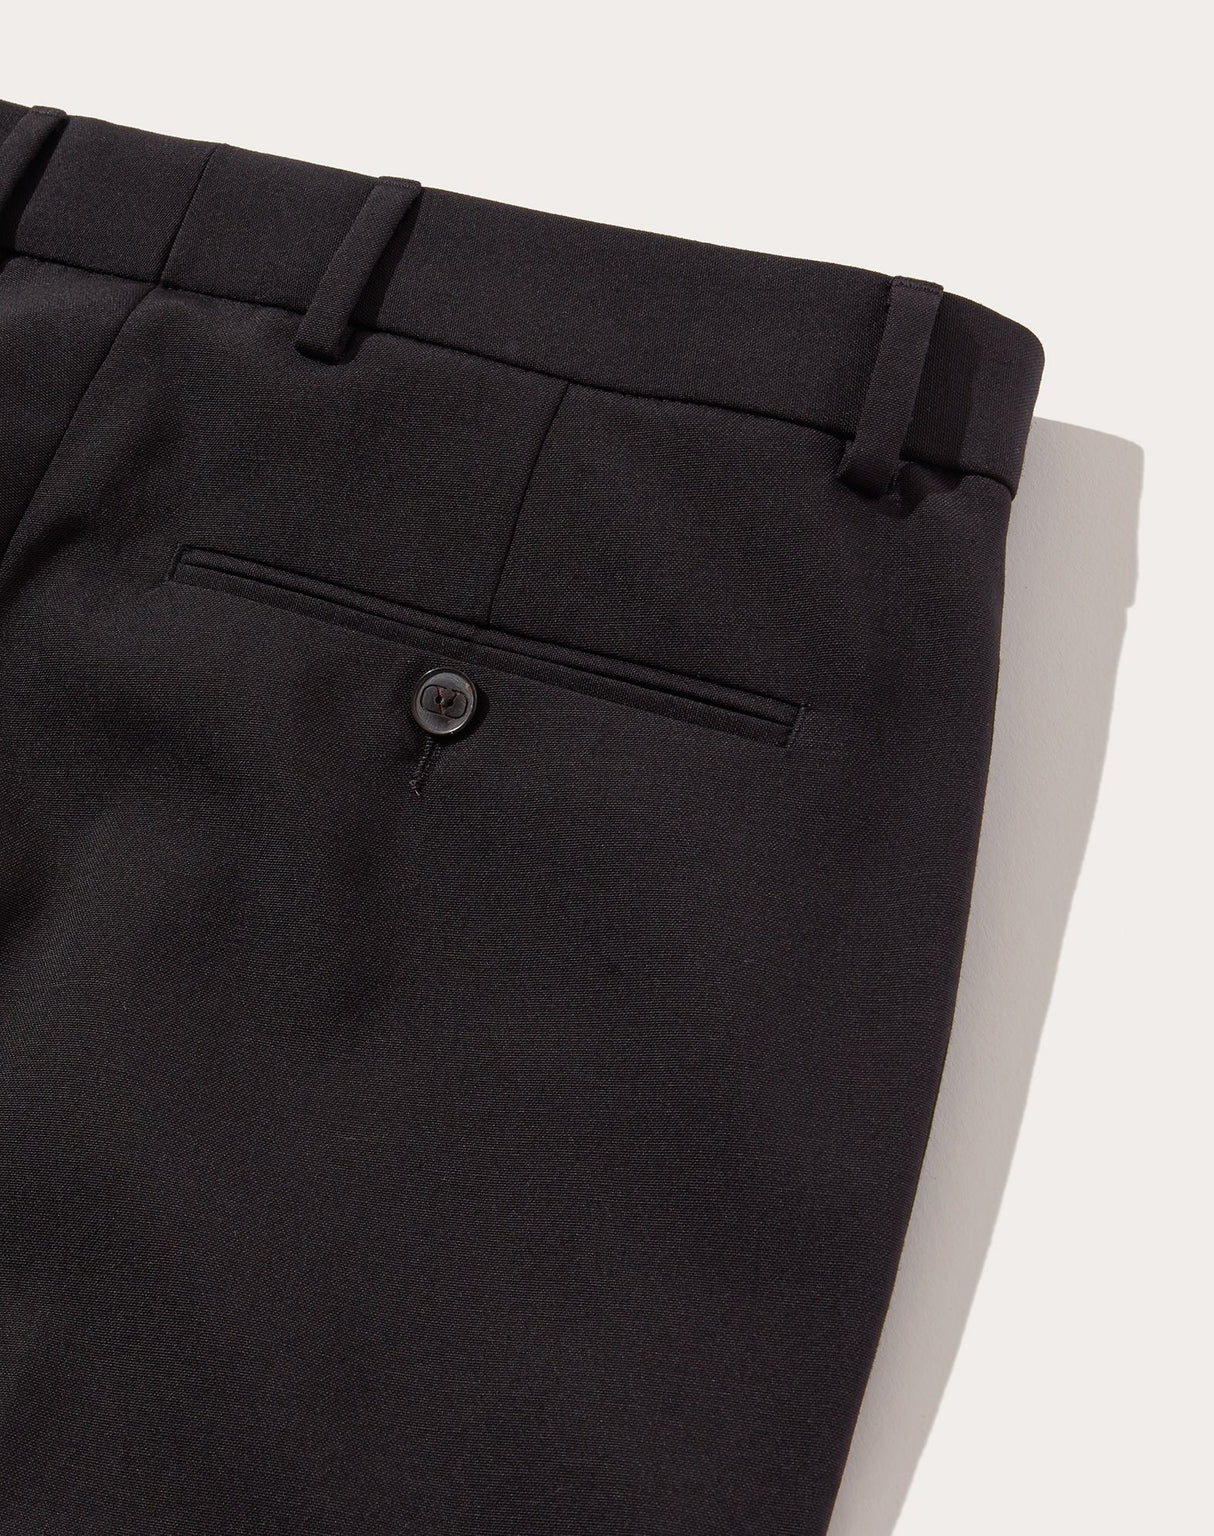 VALENTINO Sophisticated Slim Trousers in Classic Black for Men